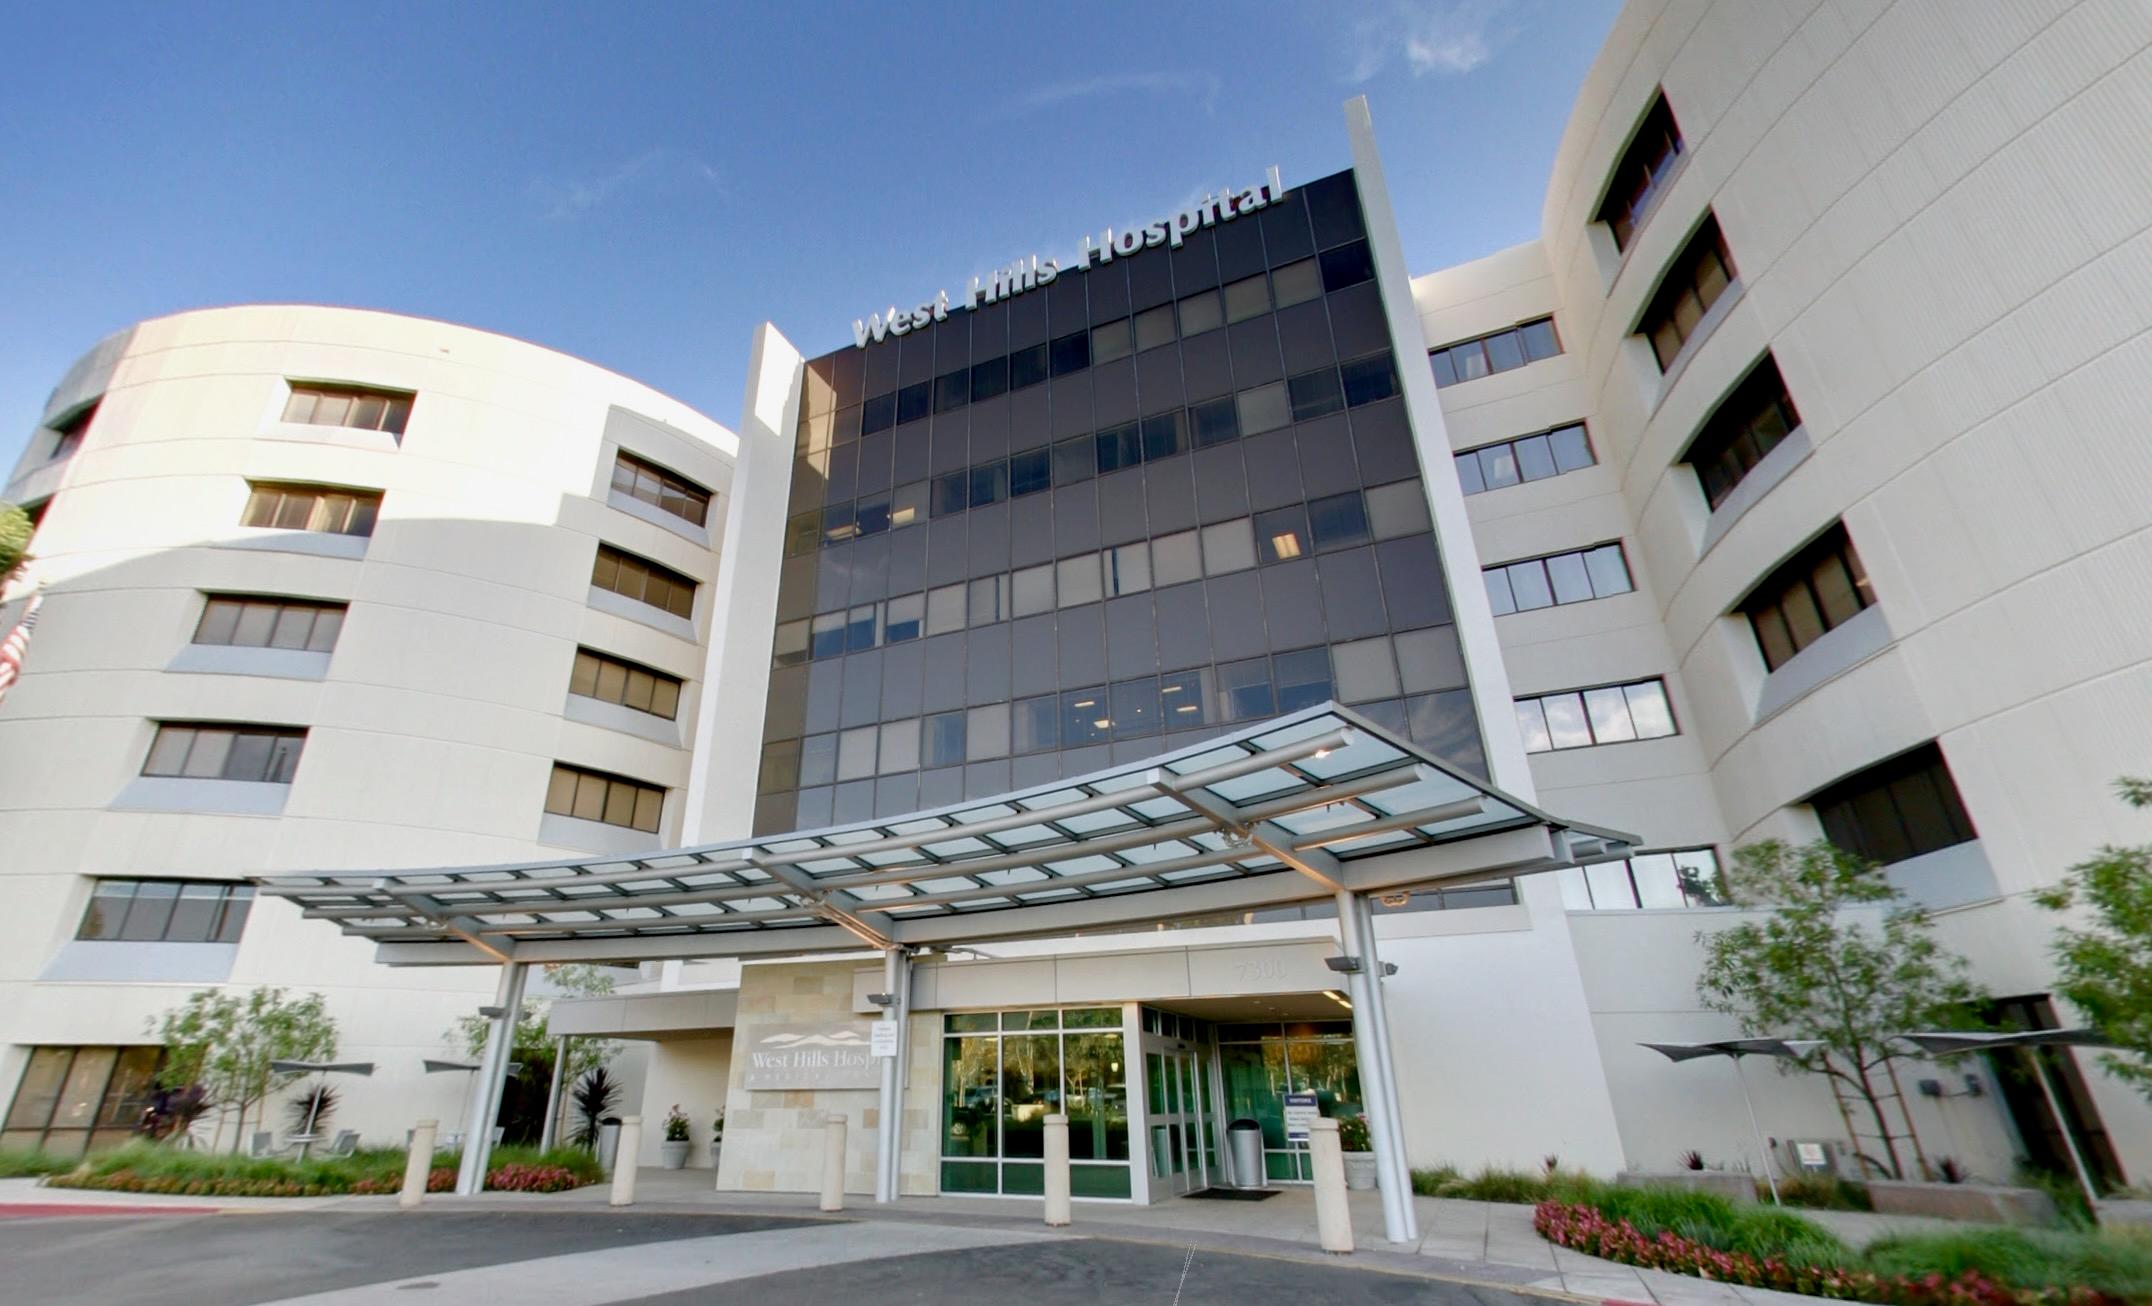 UCLA Health Acquires 260-Bed West Hills Hospital in Calabasas